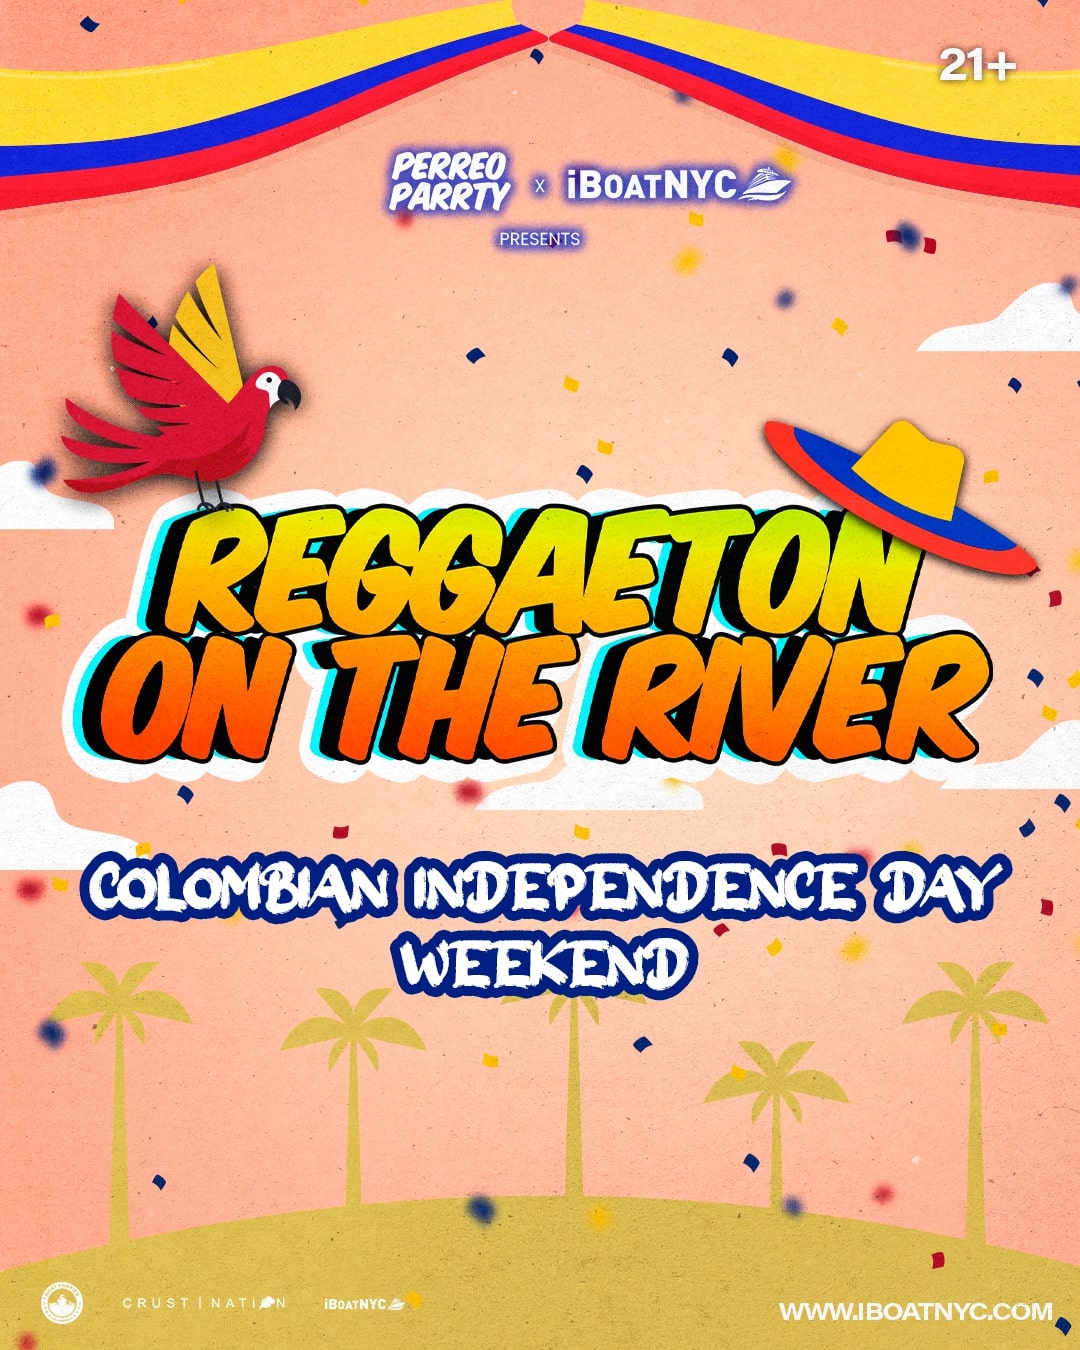 REGGAETON on the RIVER - Colombian Independence Day Sunset Yacht Cruise